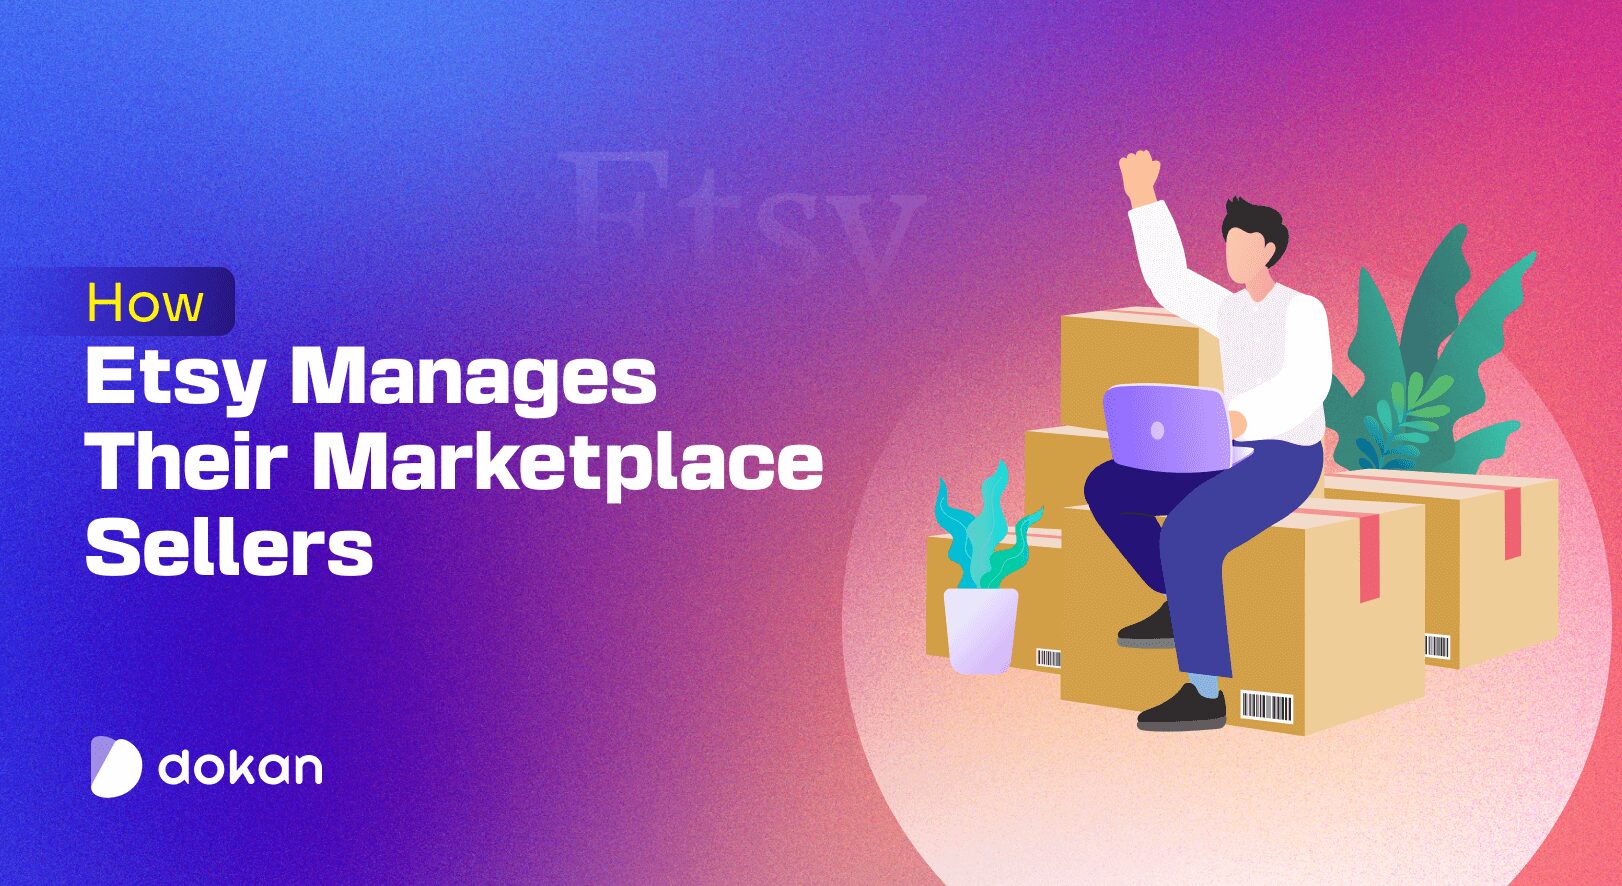 How Etsy Manages 8.3 Million Marketplace Sellers Successfully